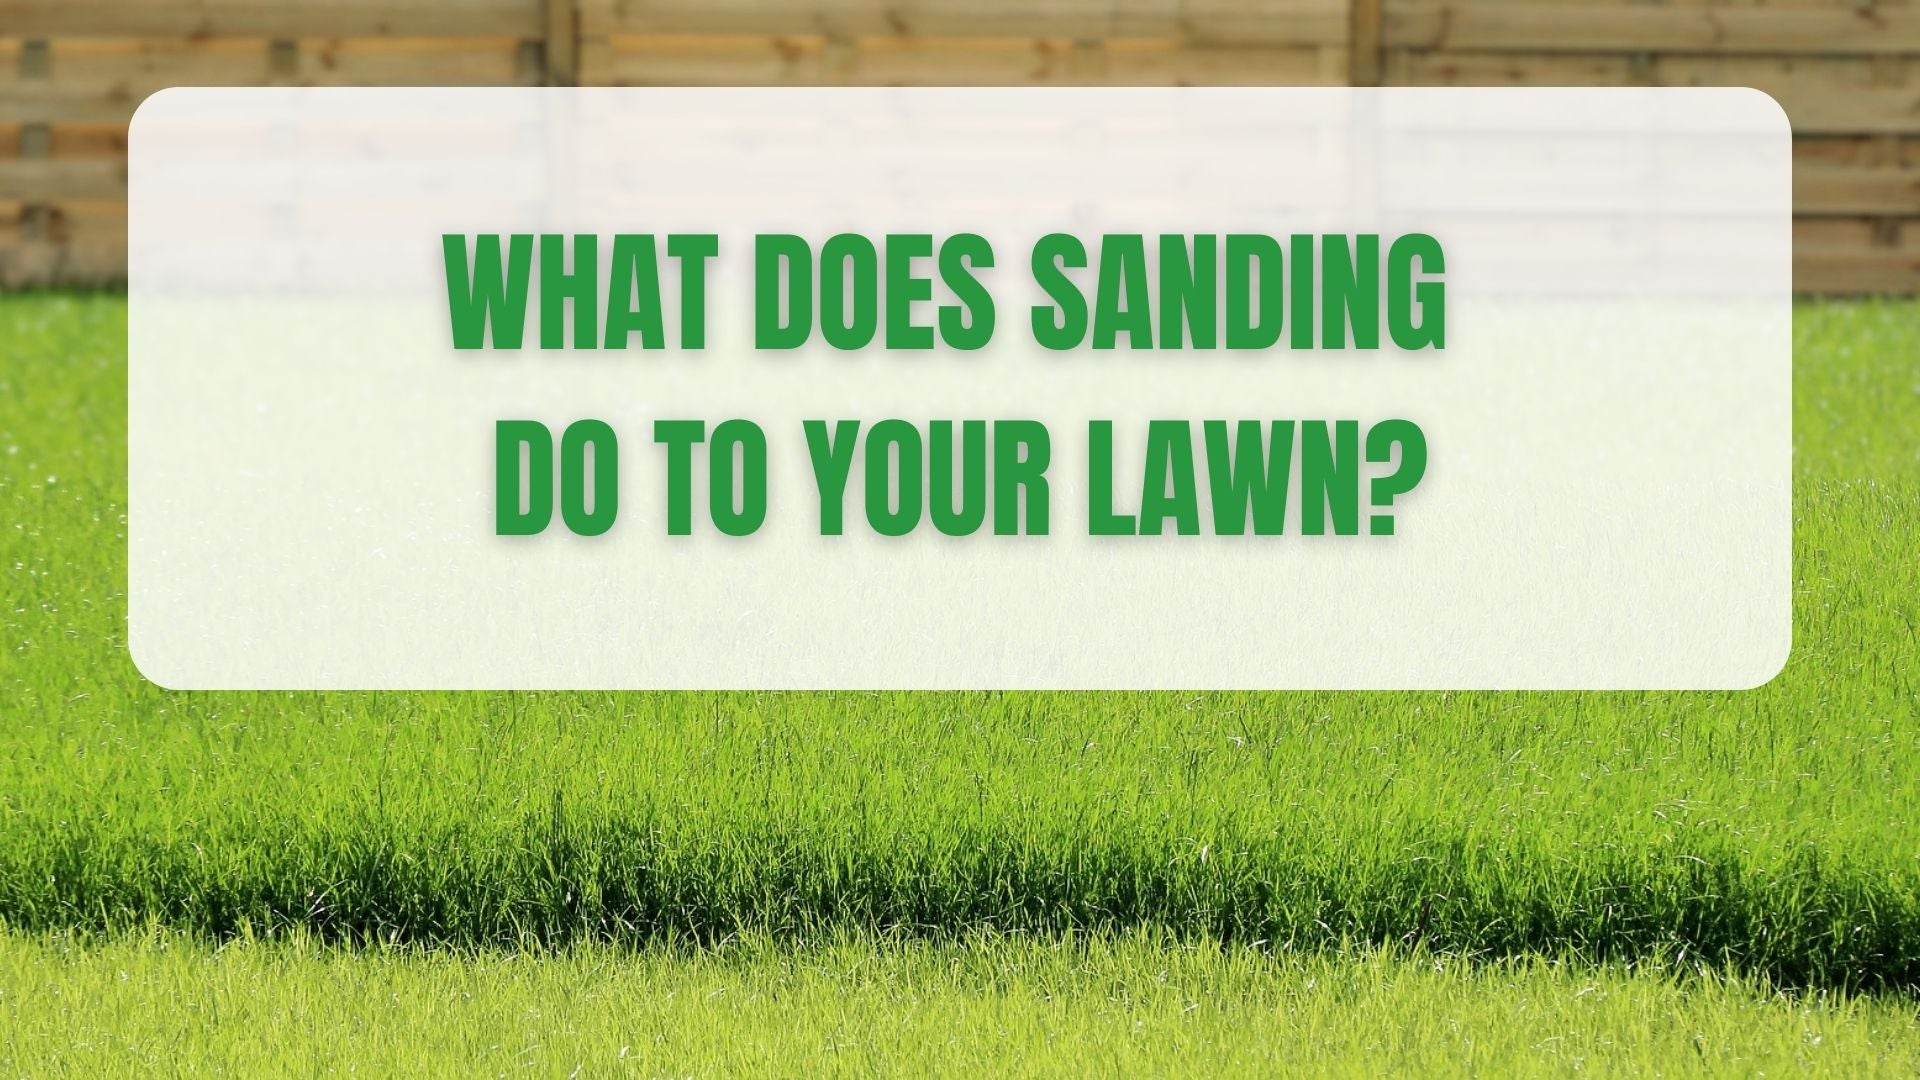 What does sanding do to your lawn?